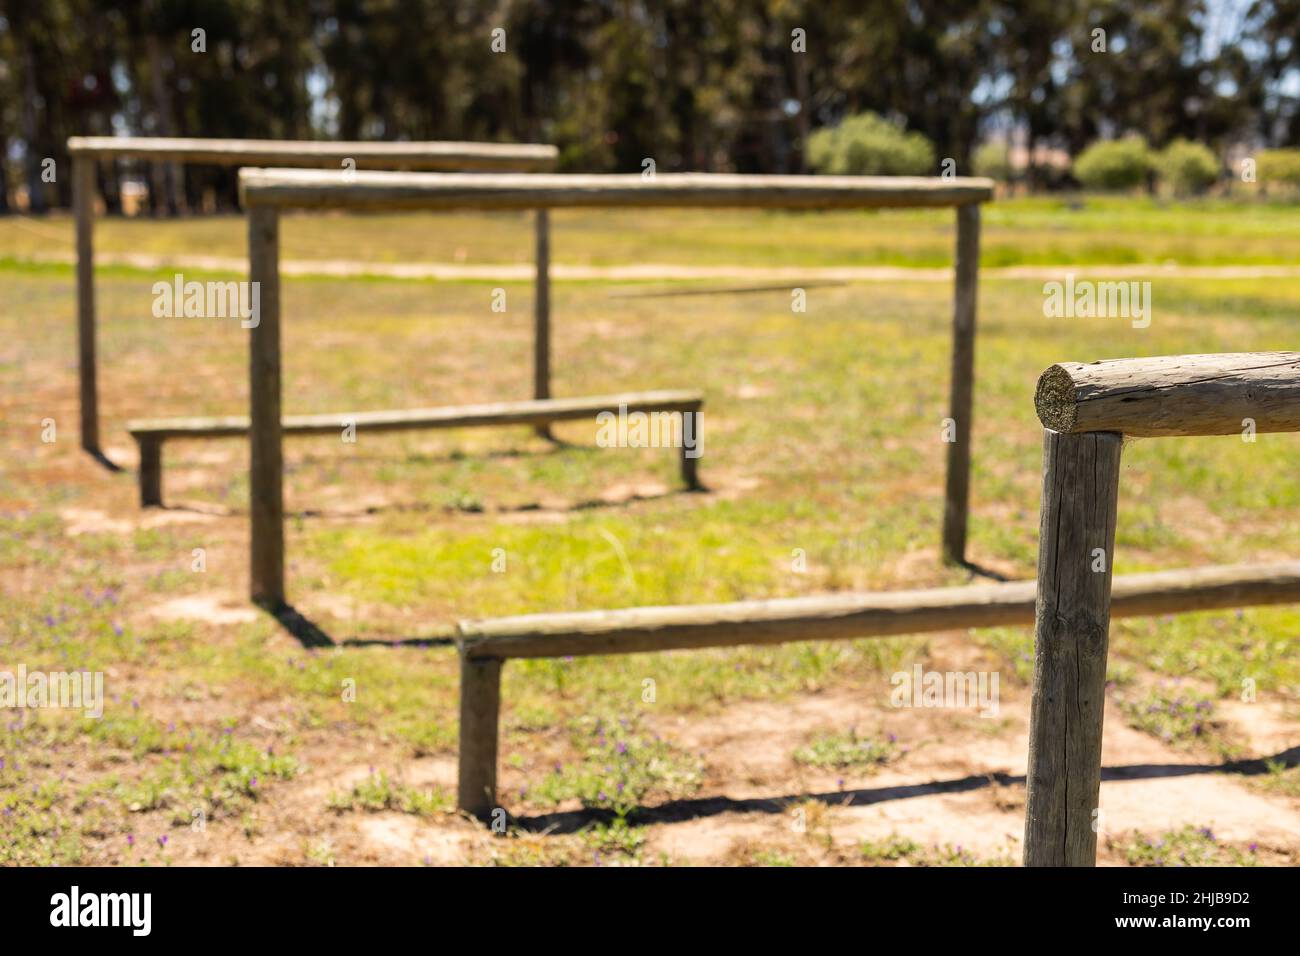 View of wooden hurdles obstacle course on a field at boot camp Stock Photo